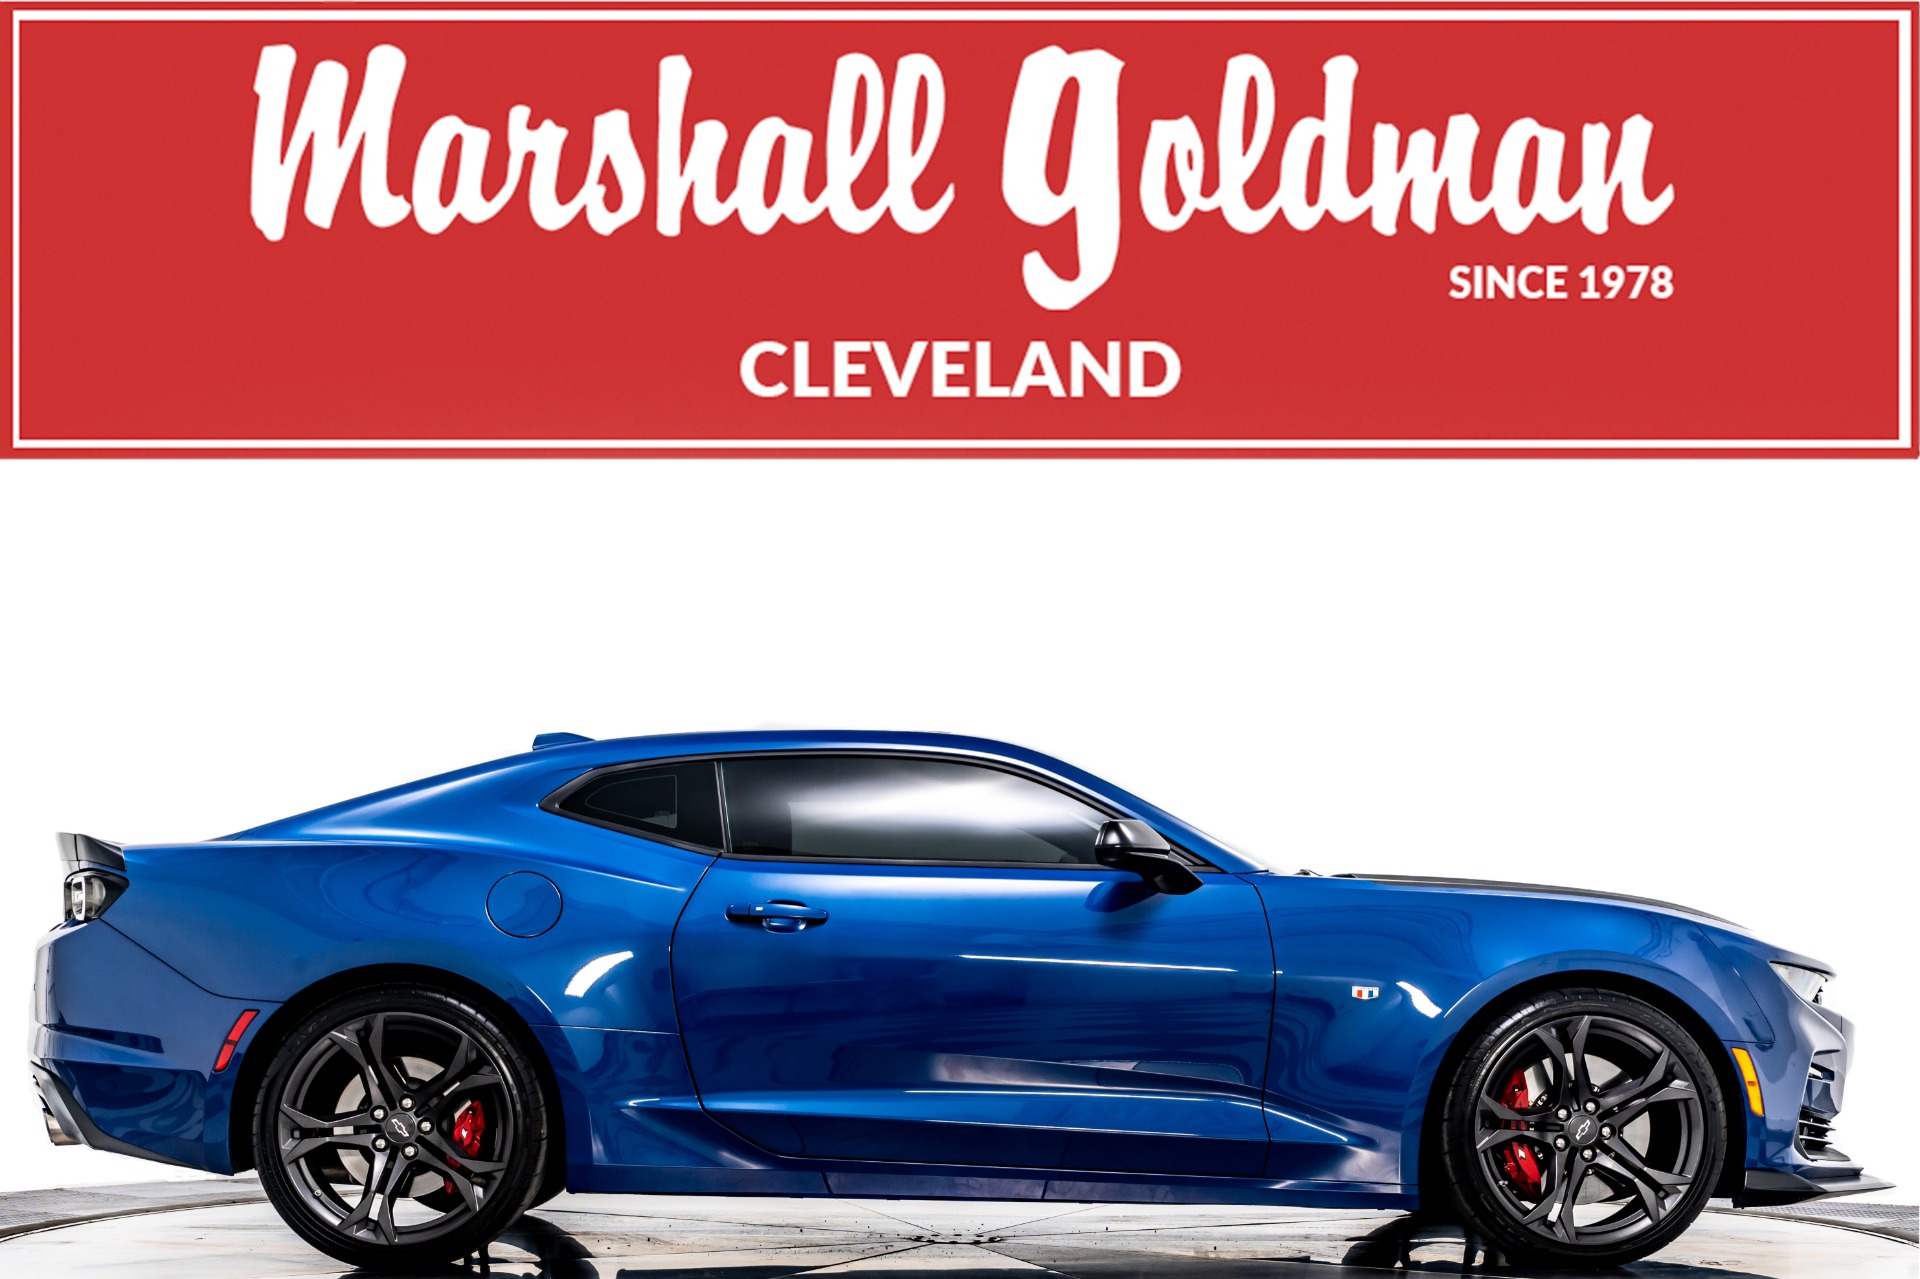 Used 2021 Chevrolet Camaro SS 1LE For Sale (Sold) | Marshall Goldman  Cleveland Stock #WCAMSS1LE